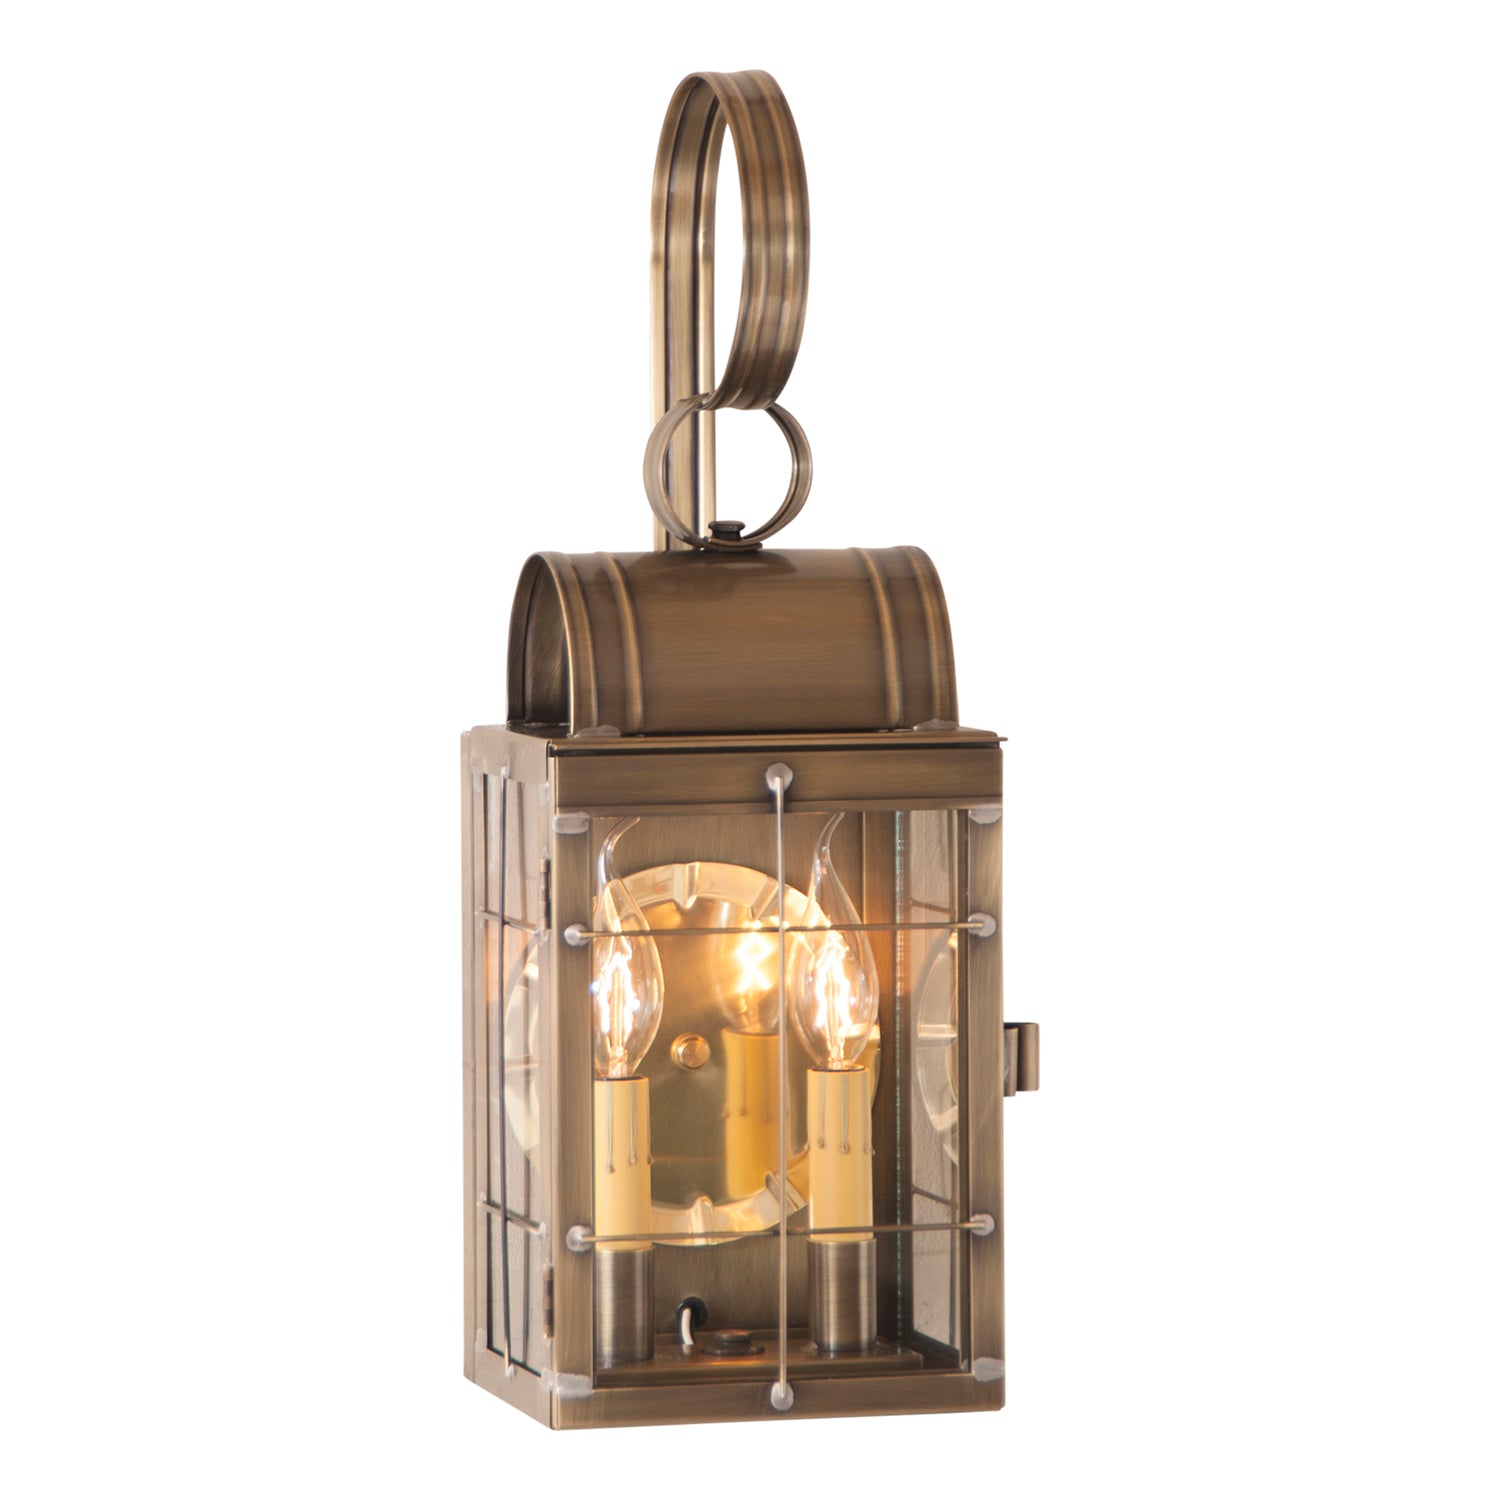 Double Wall Lantern in Weathered Brass